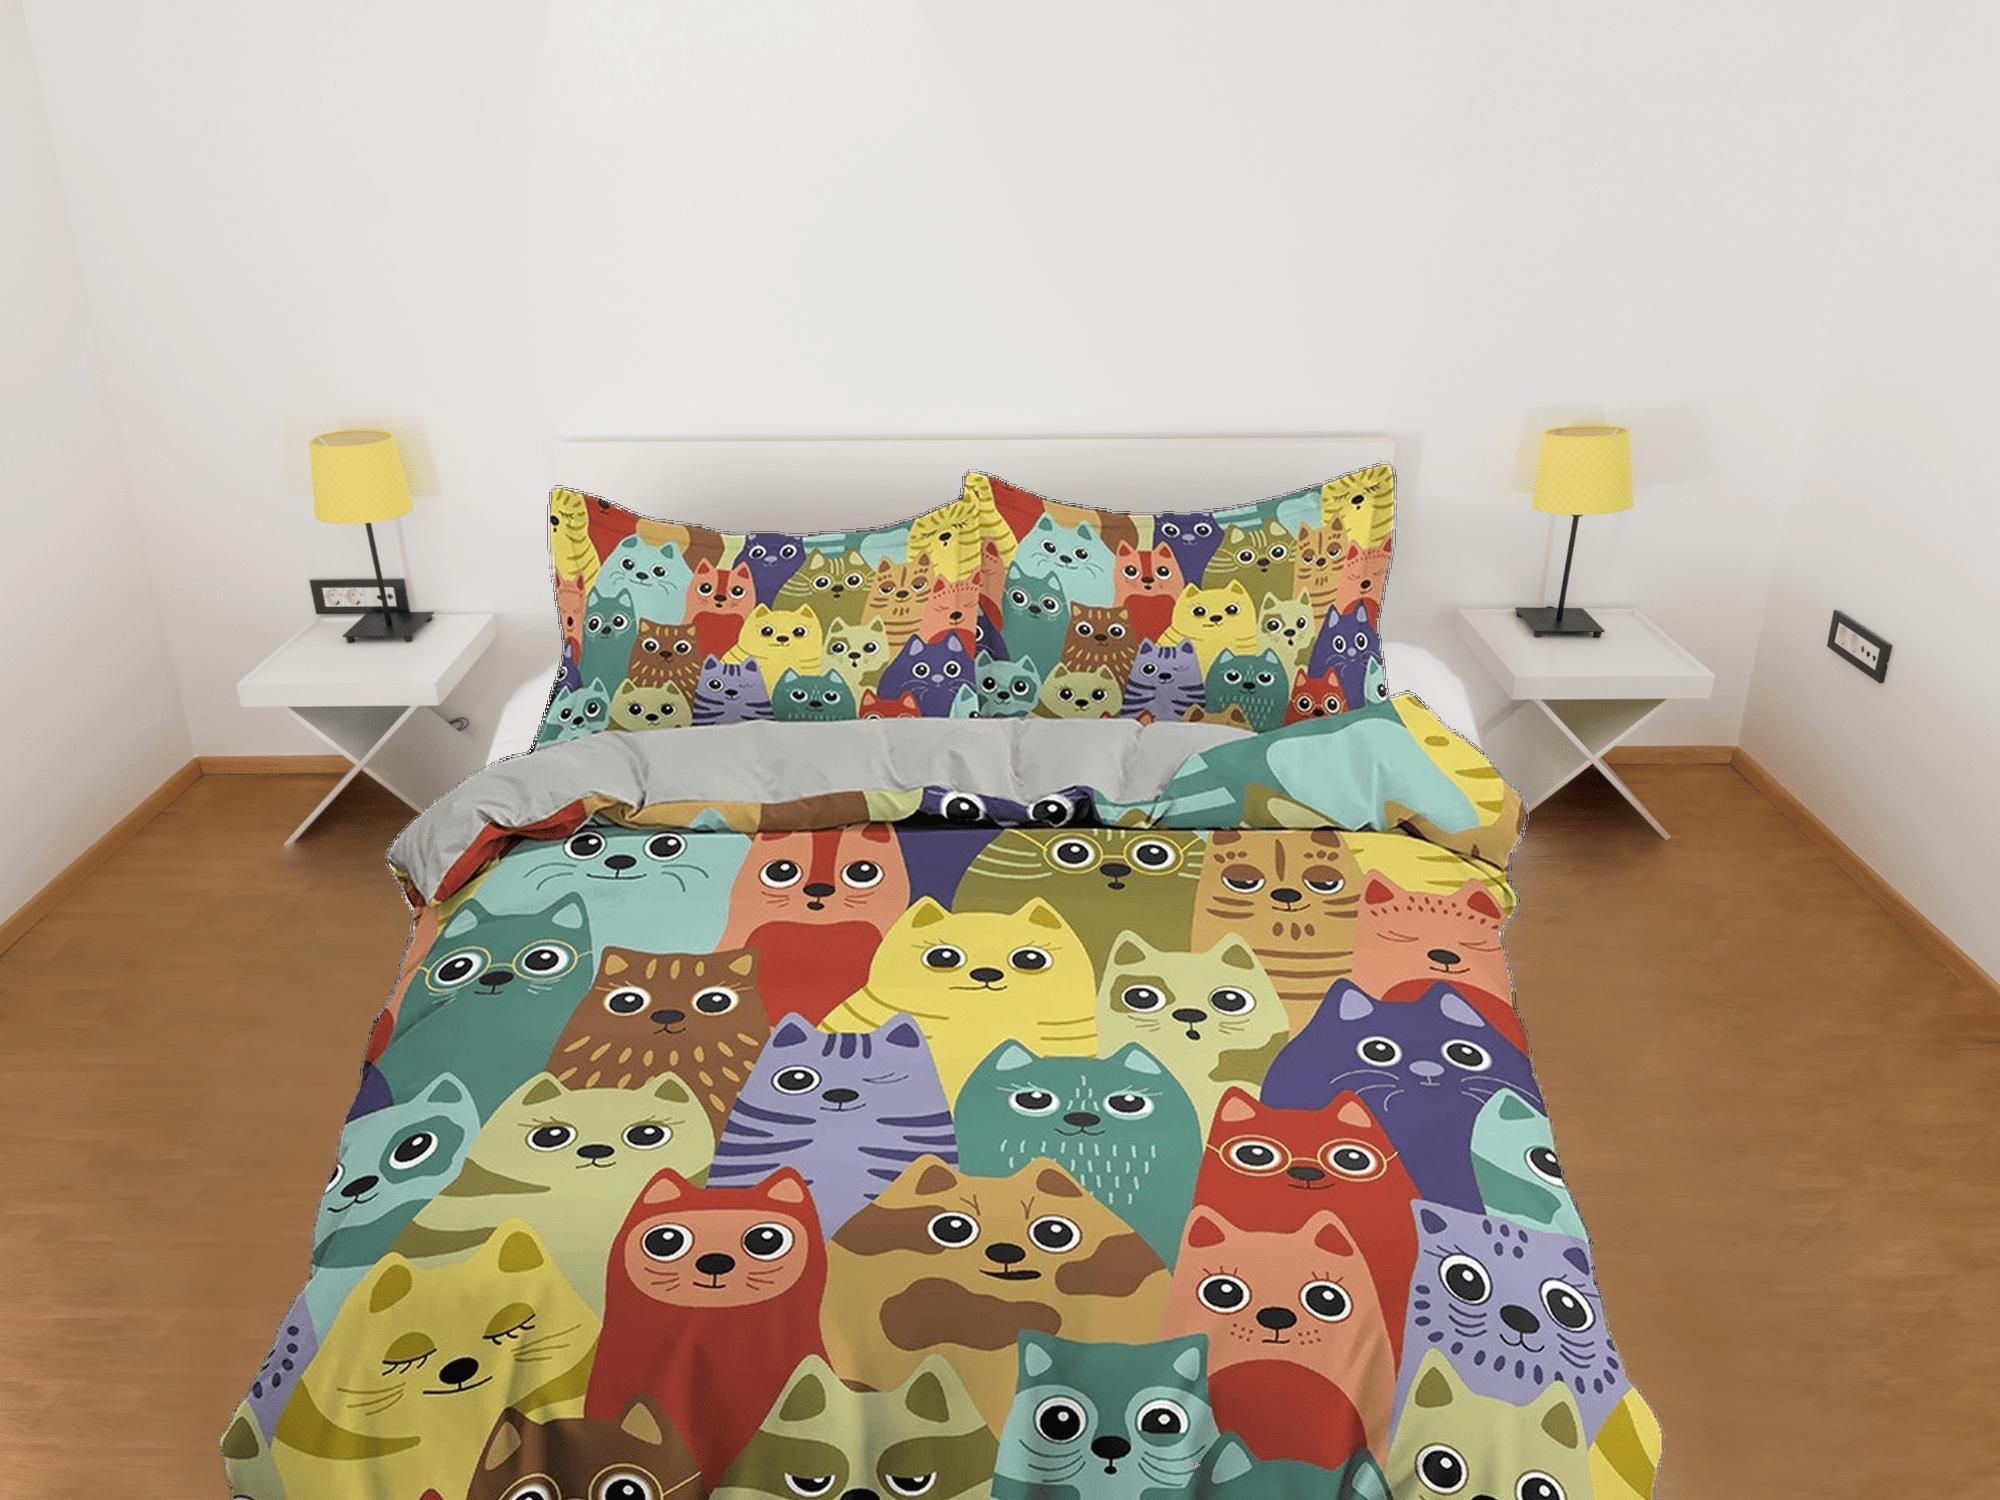 daintyduvet Cute colorful cats toddler bedding, unique duvet cover for nursery kids, crib bedding pillowcase, baby zipper bedding, king queen full twin